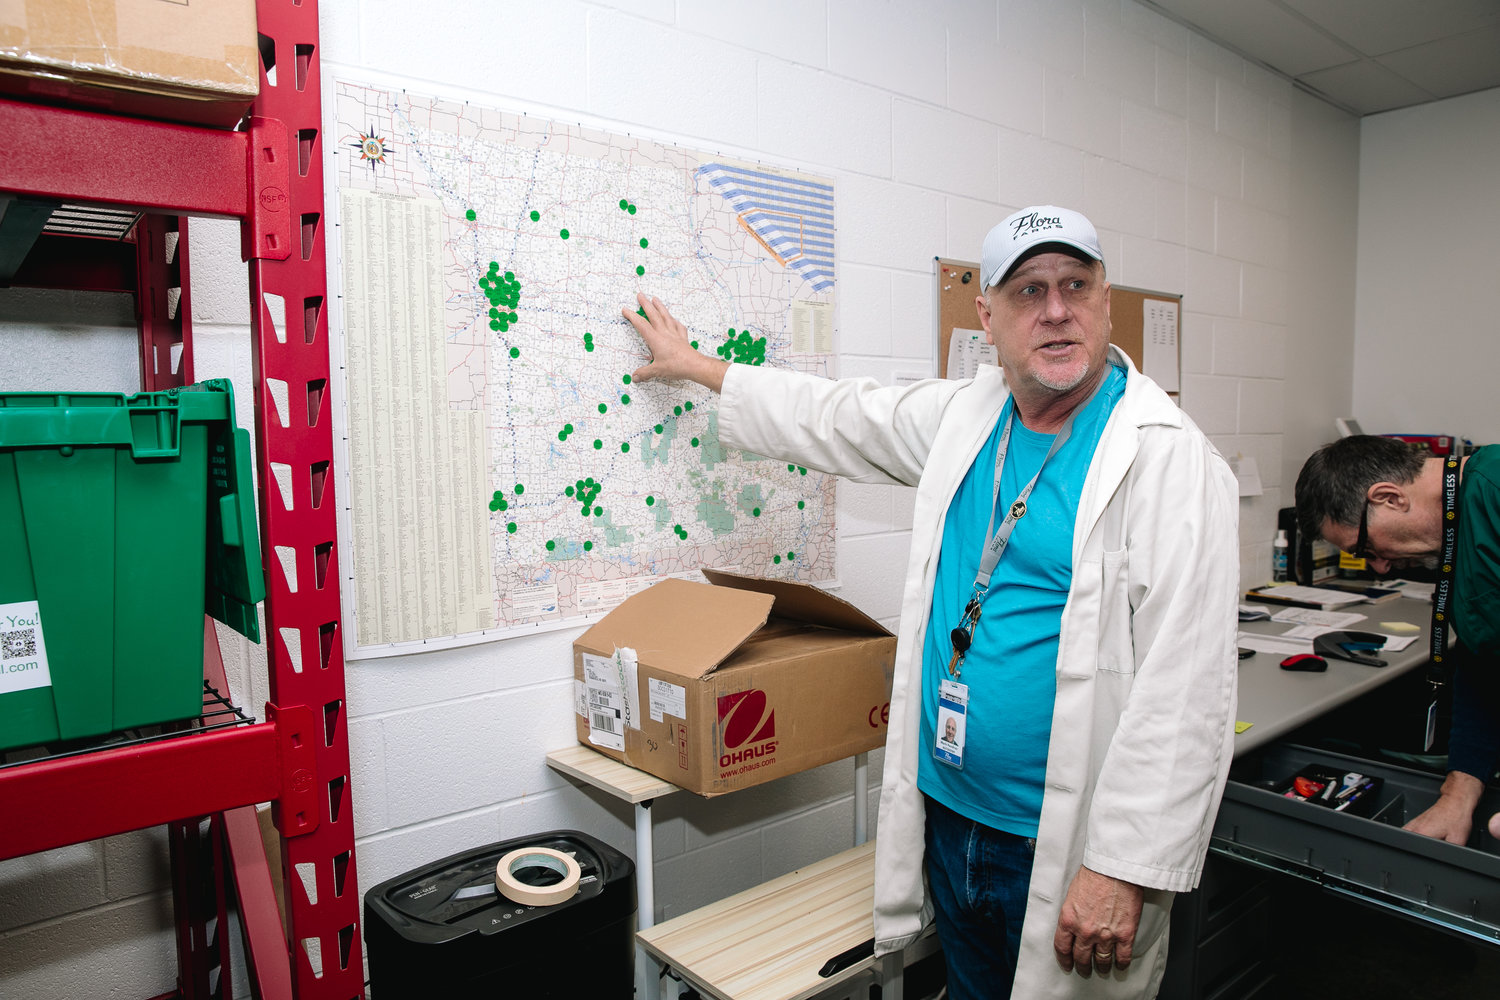 STATEWIDE REACH: Flora Farms President Mark Hendren points out where the company supplies cannabis flower in dispensaries and manufacturing facilities across Missouri.